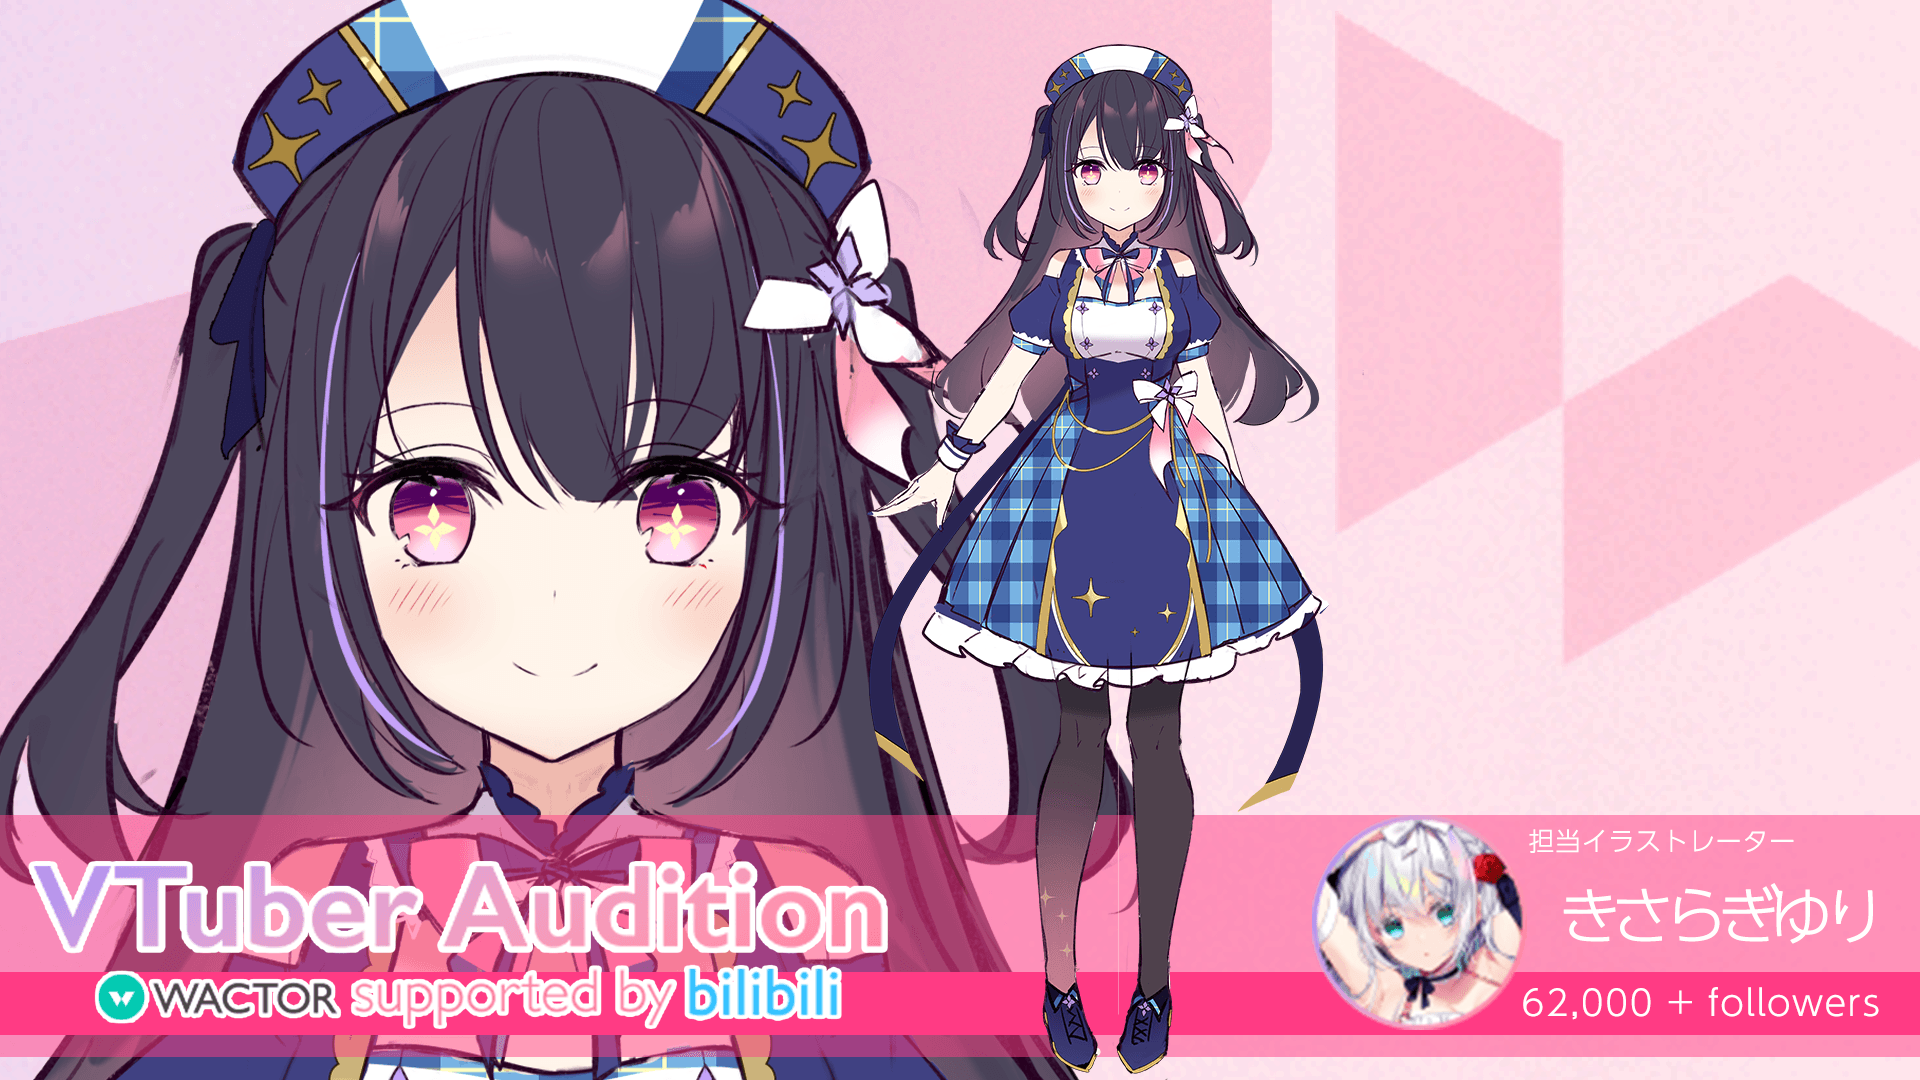 wactor-vtuber-audition-supported-by-bilibili-3-2